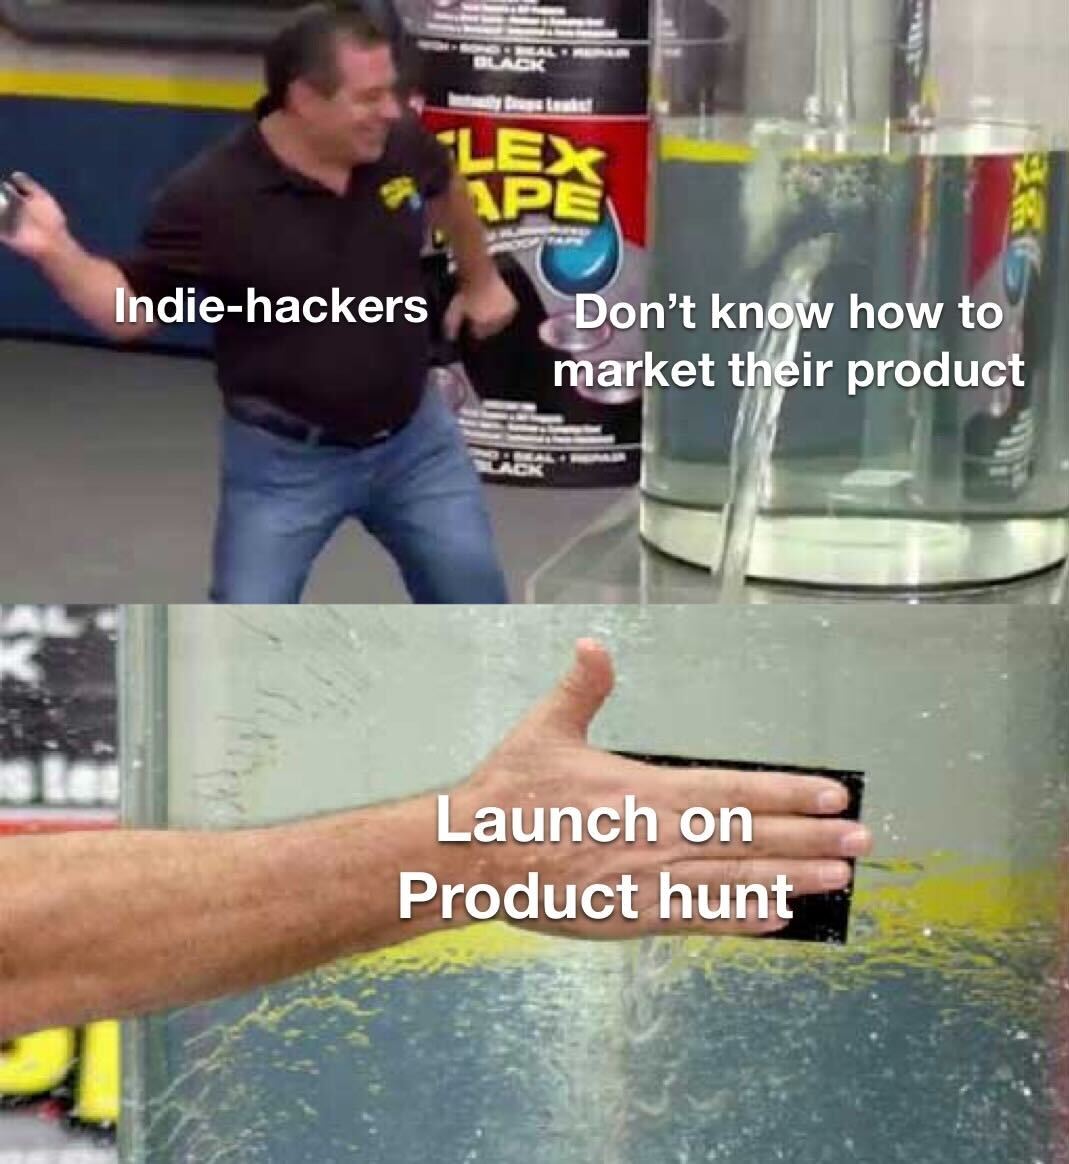 Launching on Product Hunt forces indie hackers to learn how to be marketers >>>